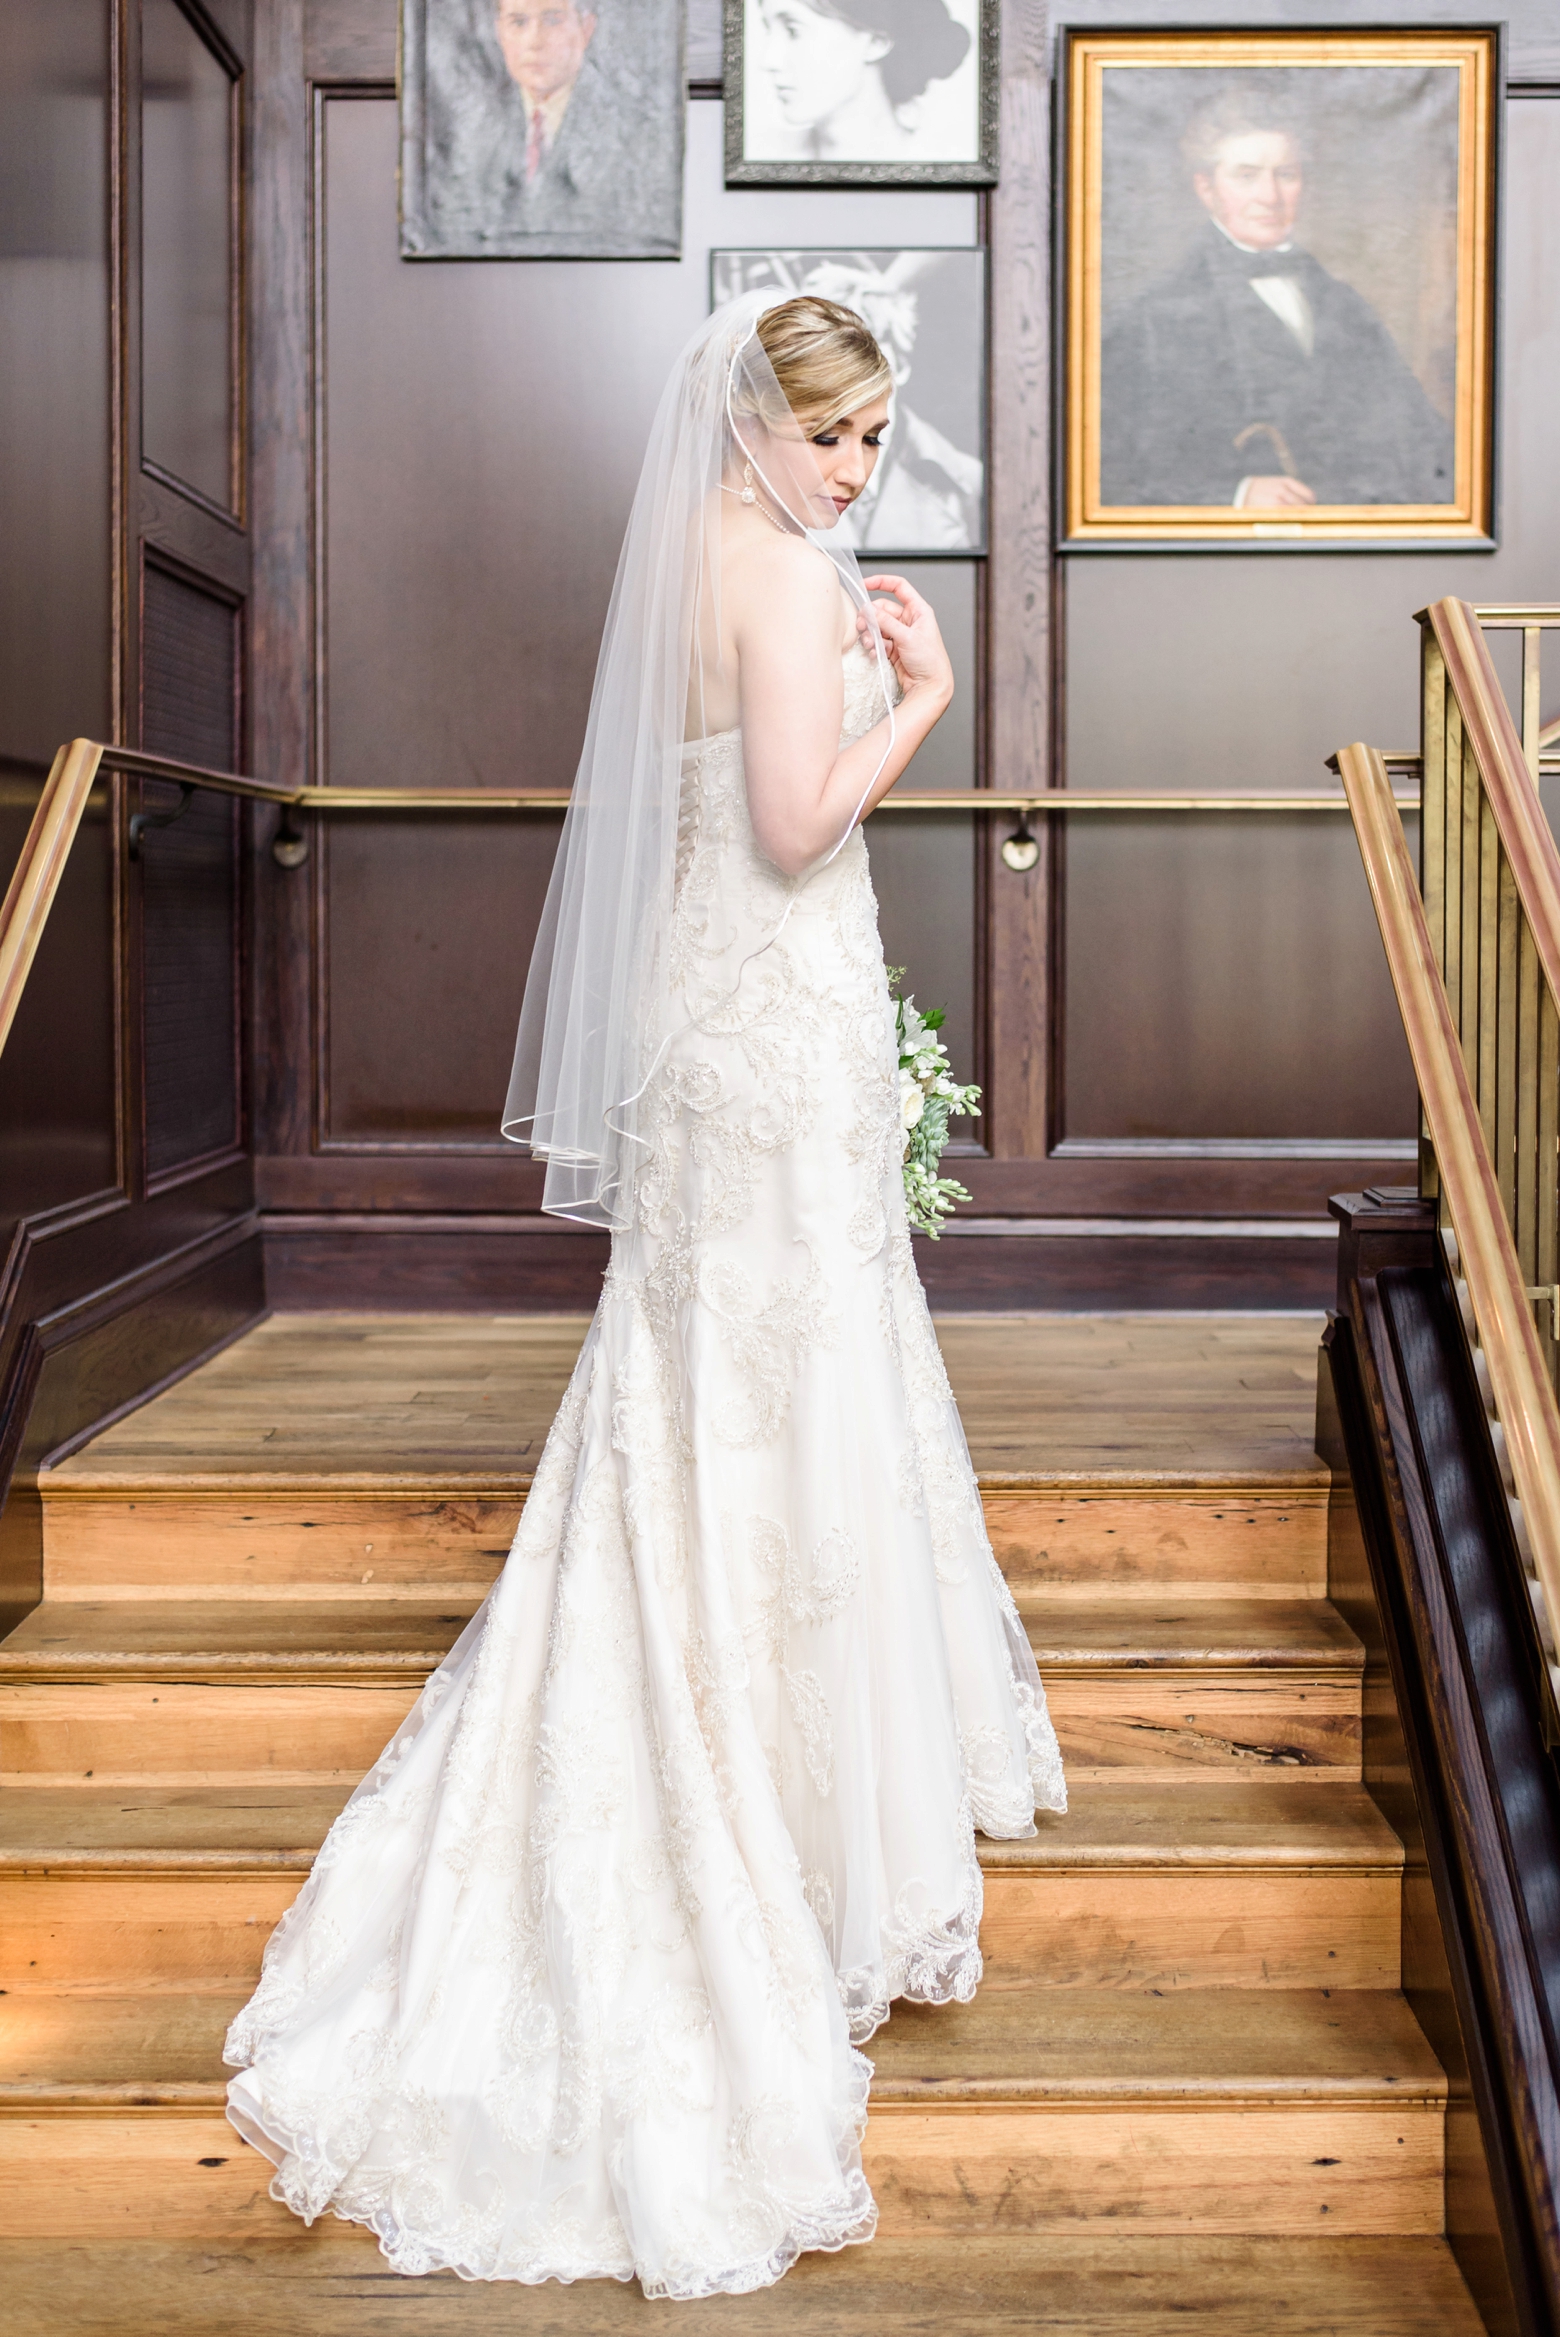 The Bride poses on the stairs before her Oxford Exchange wedding